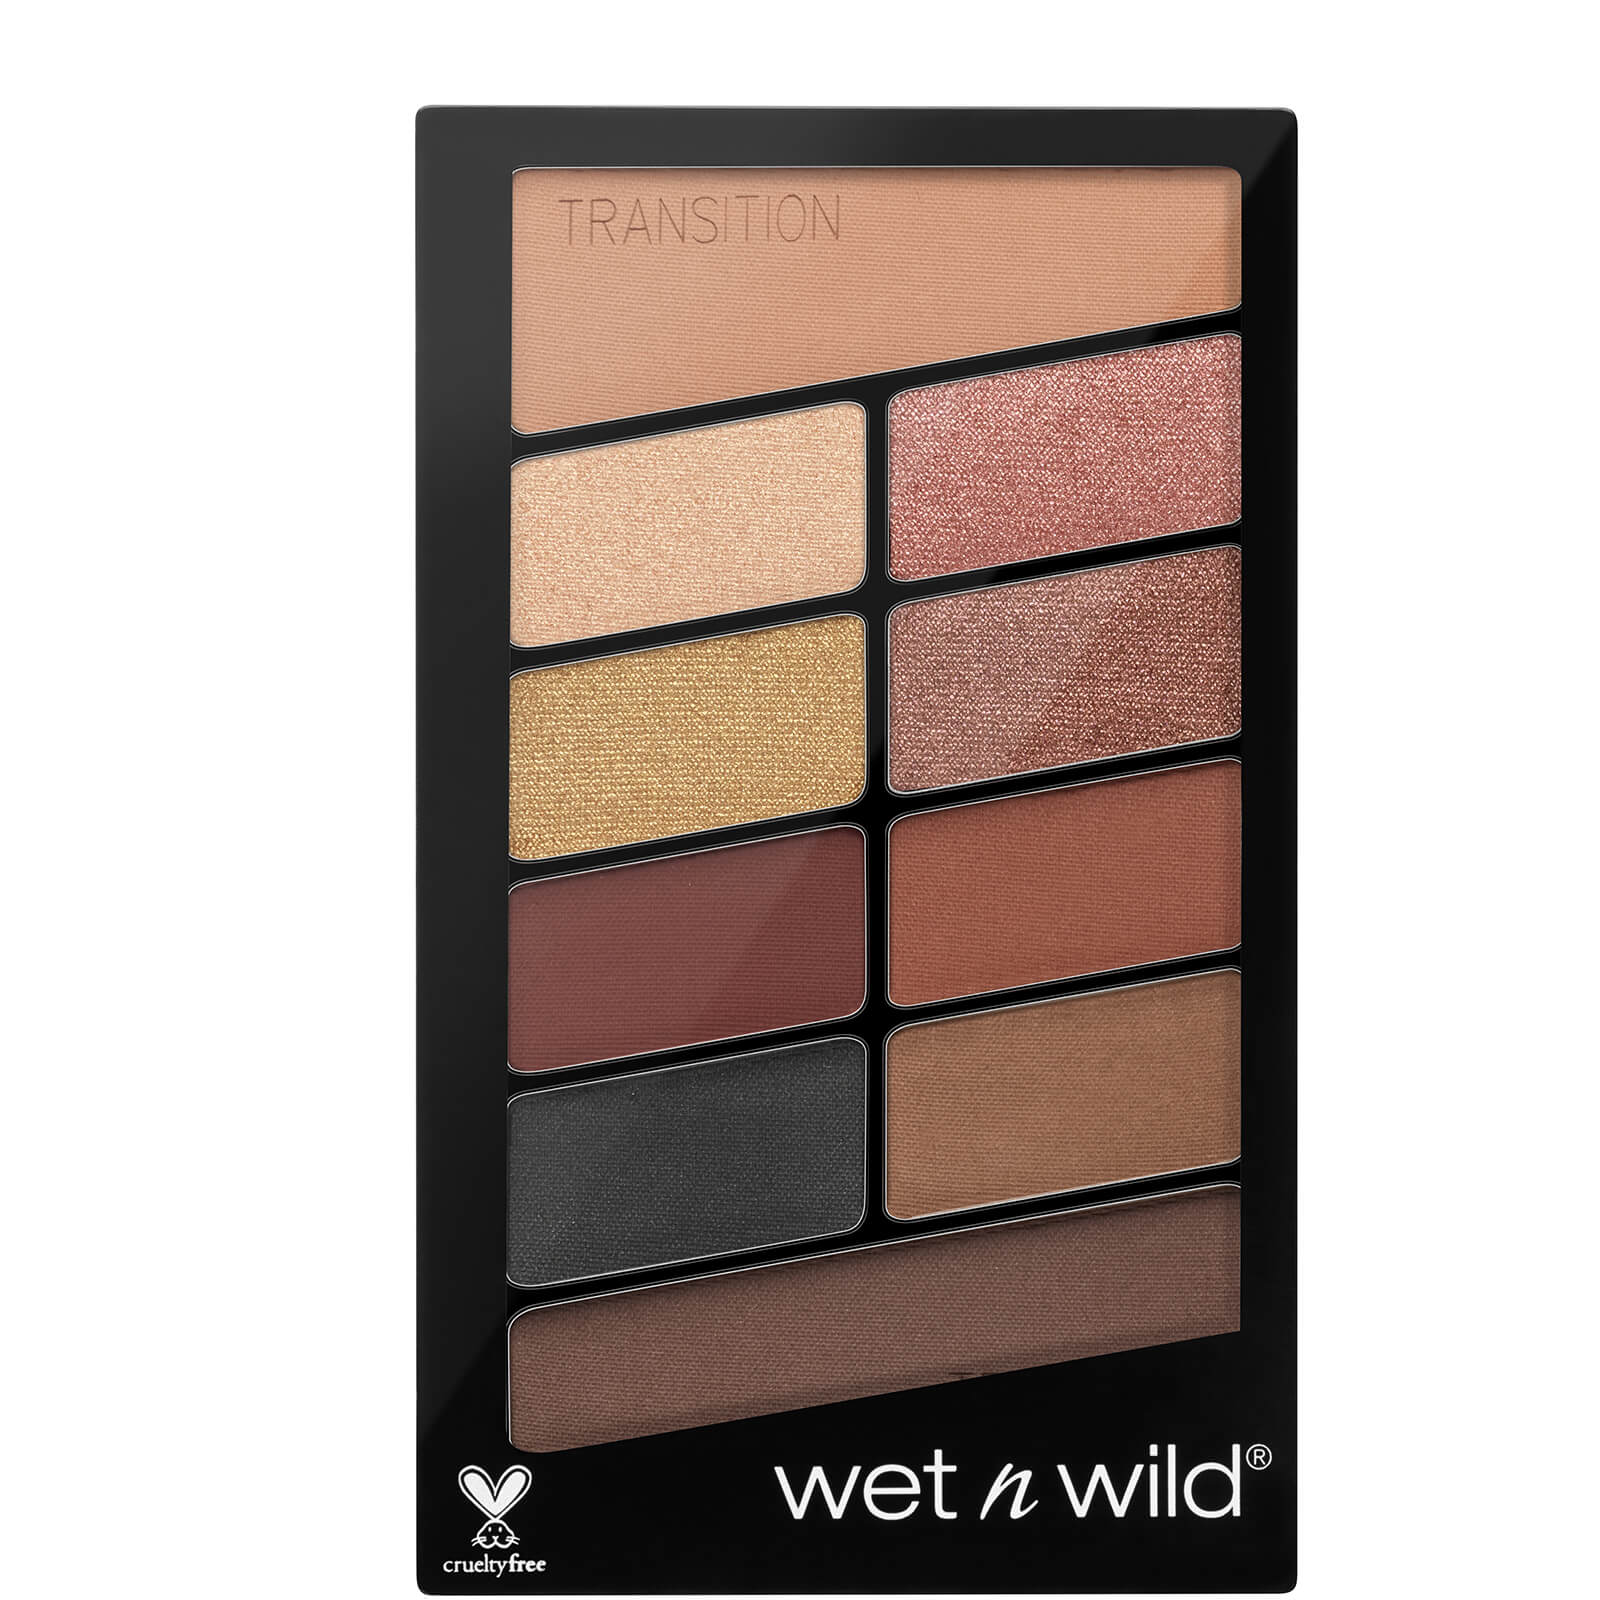 Photos - Eyeshadow Wet n Wild coloricon 10 Pan Palette - My Glamour Squad 10g E756A 